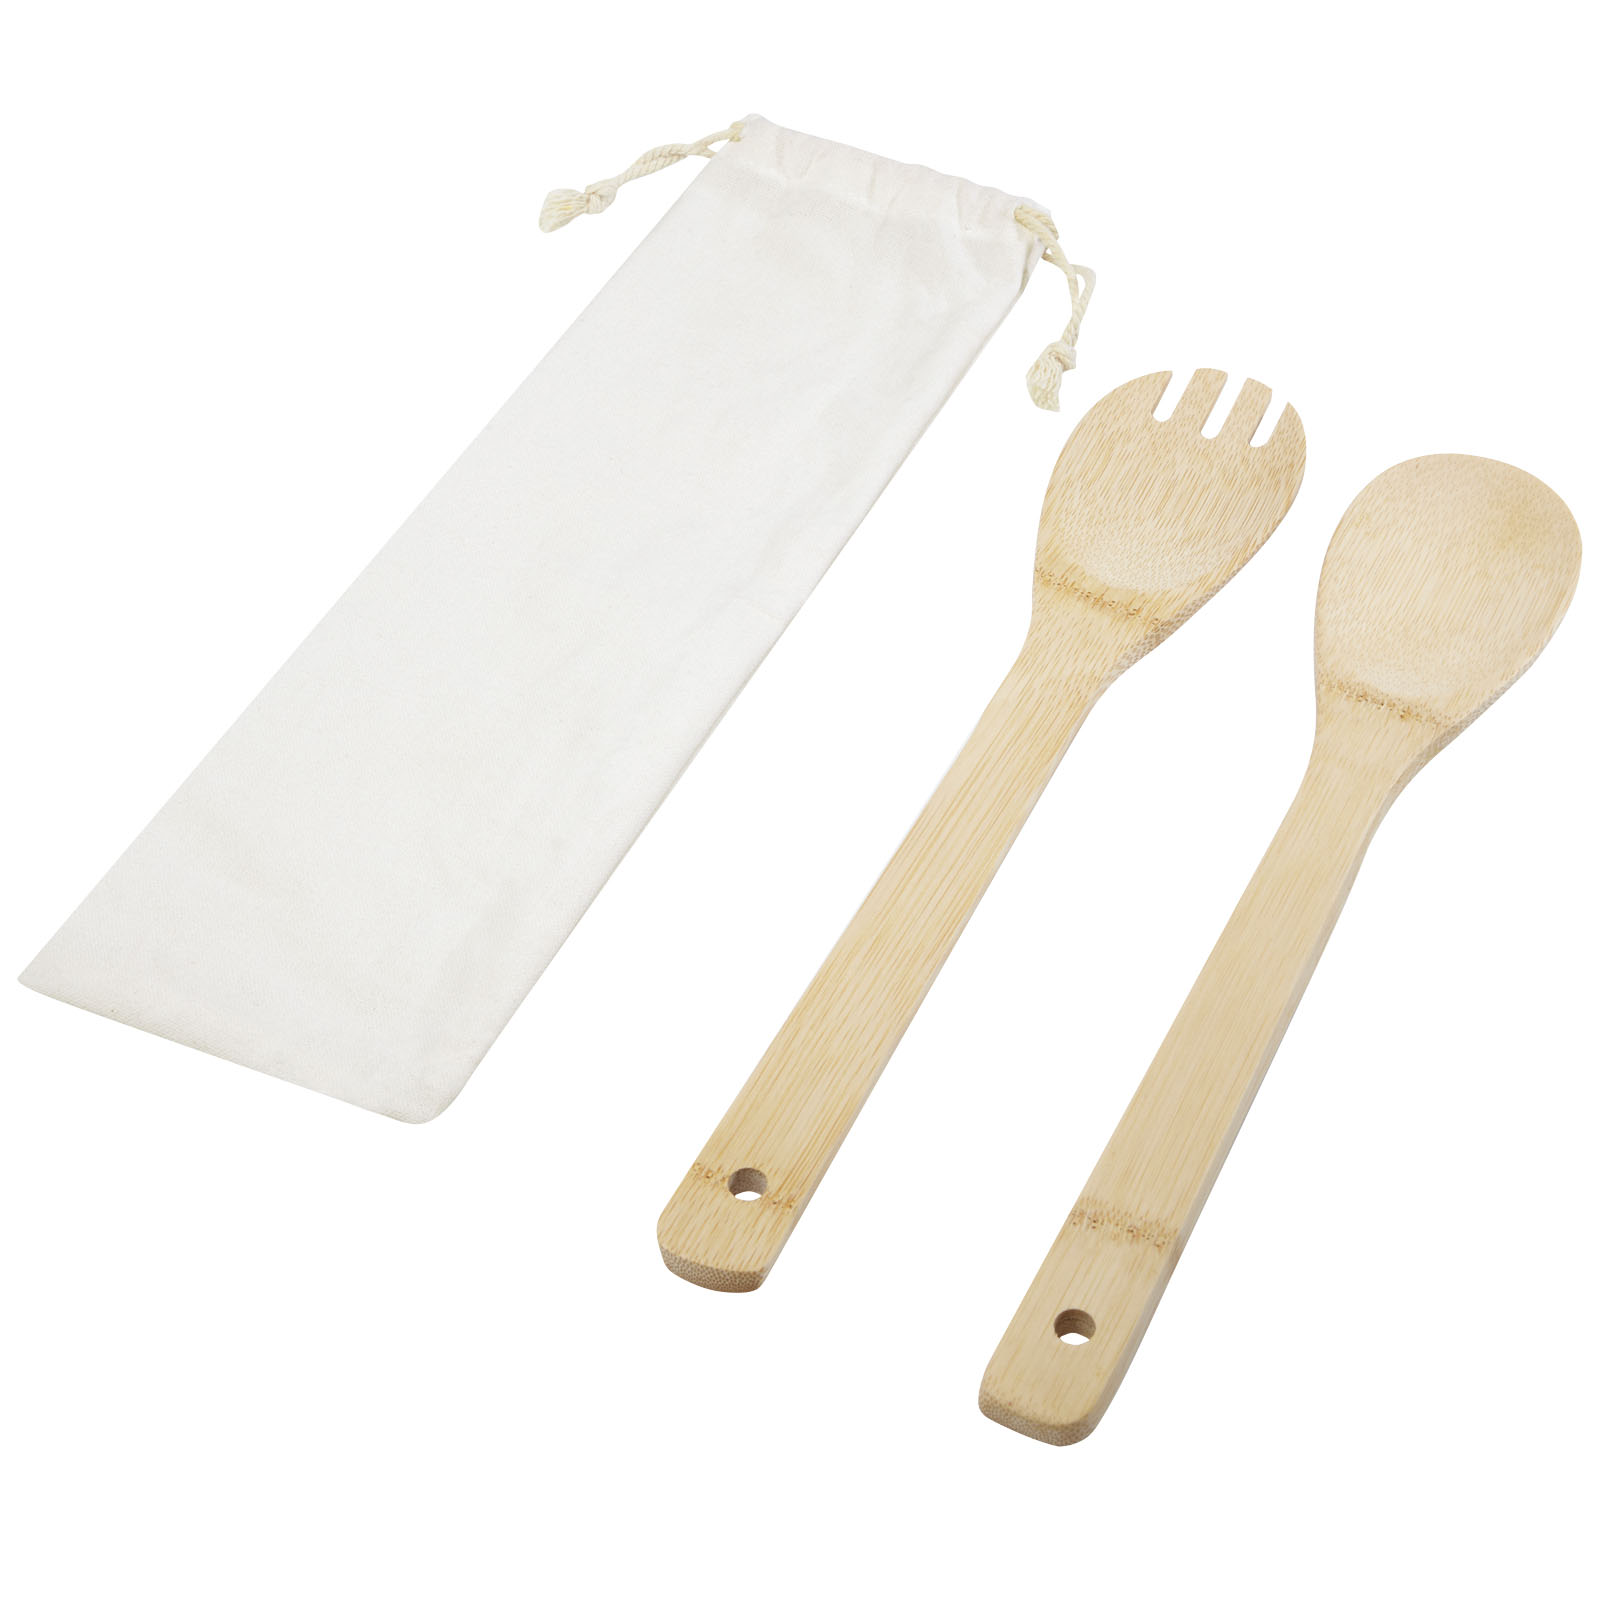 Advertising Kitchenware - Endiv bamboo salad spoon and fork - 0